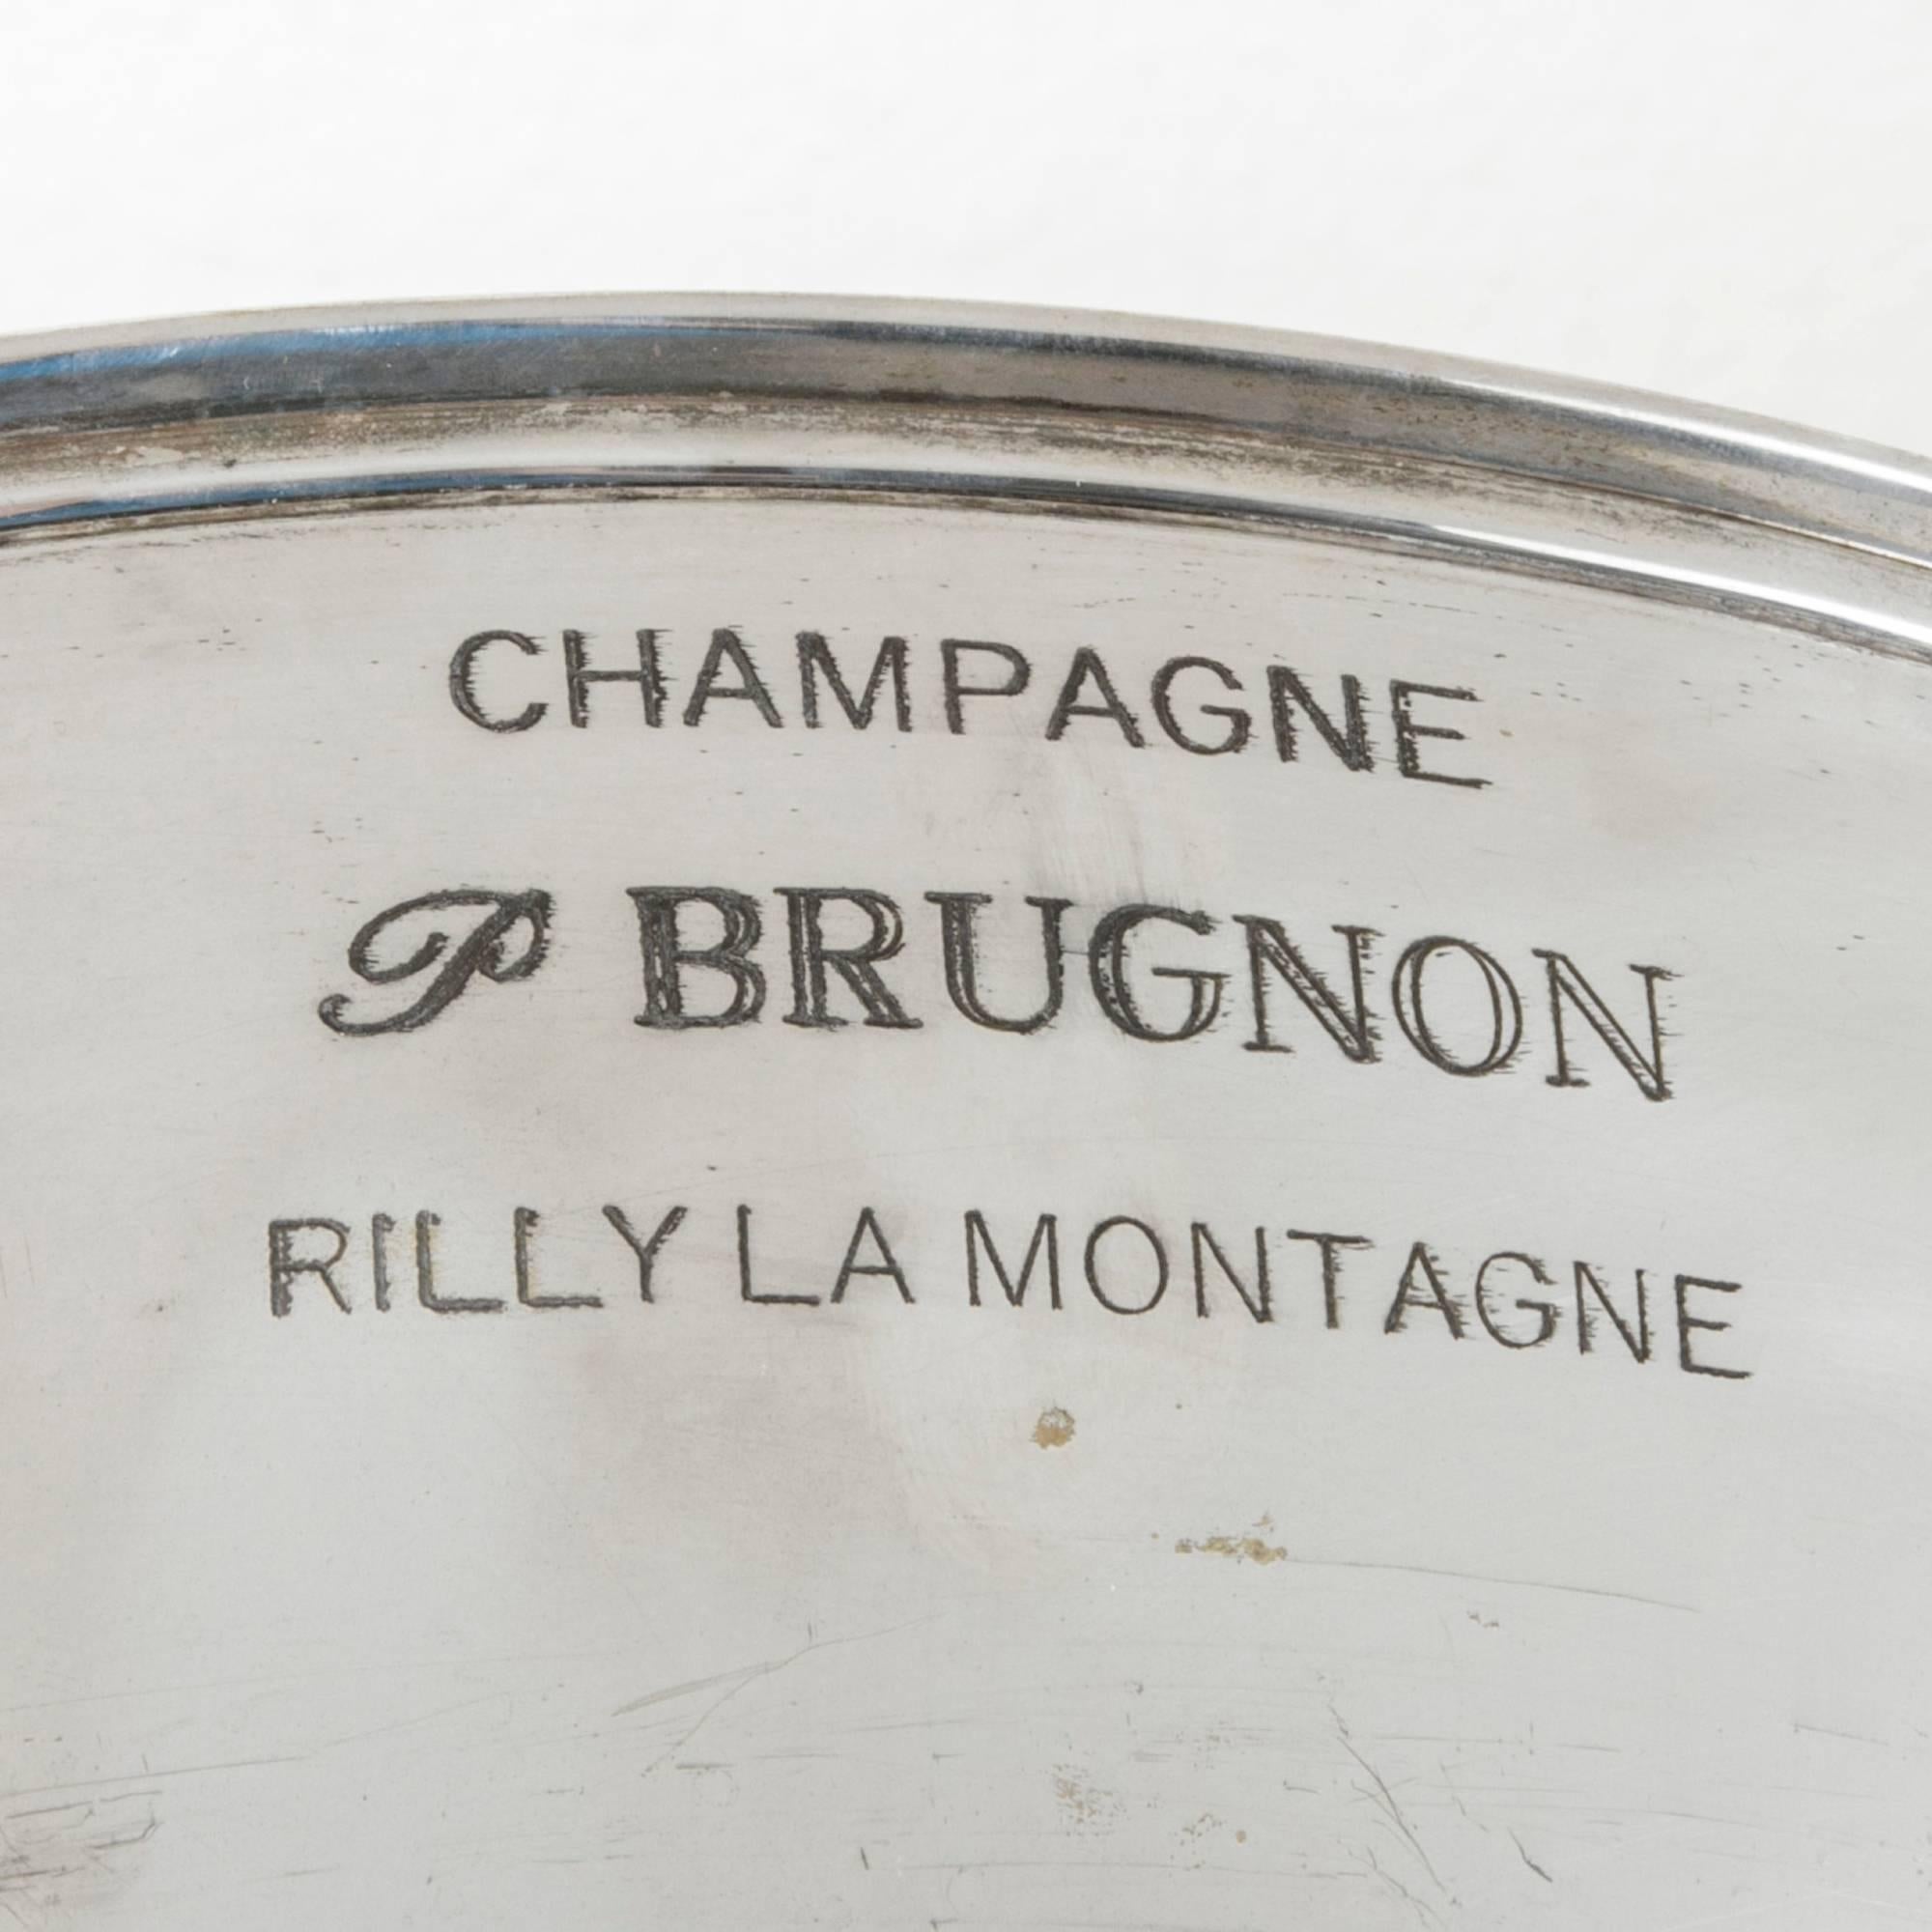 This large hotel champagne bucket is designed to chill up to six bottles at a time and is engraved with the mark of the champagne domain, P. Brugnon, Rilly La Montagne. An exquisite bar piece, this silver bowl will display beautifully on a